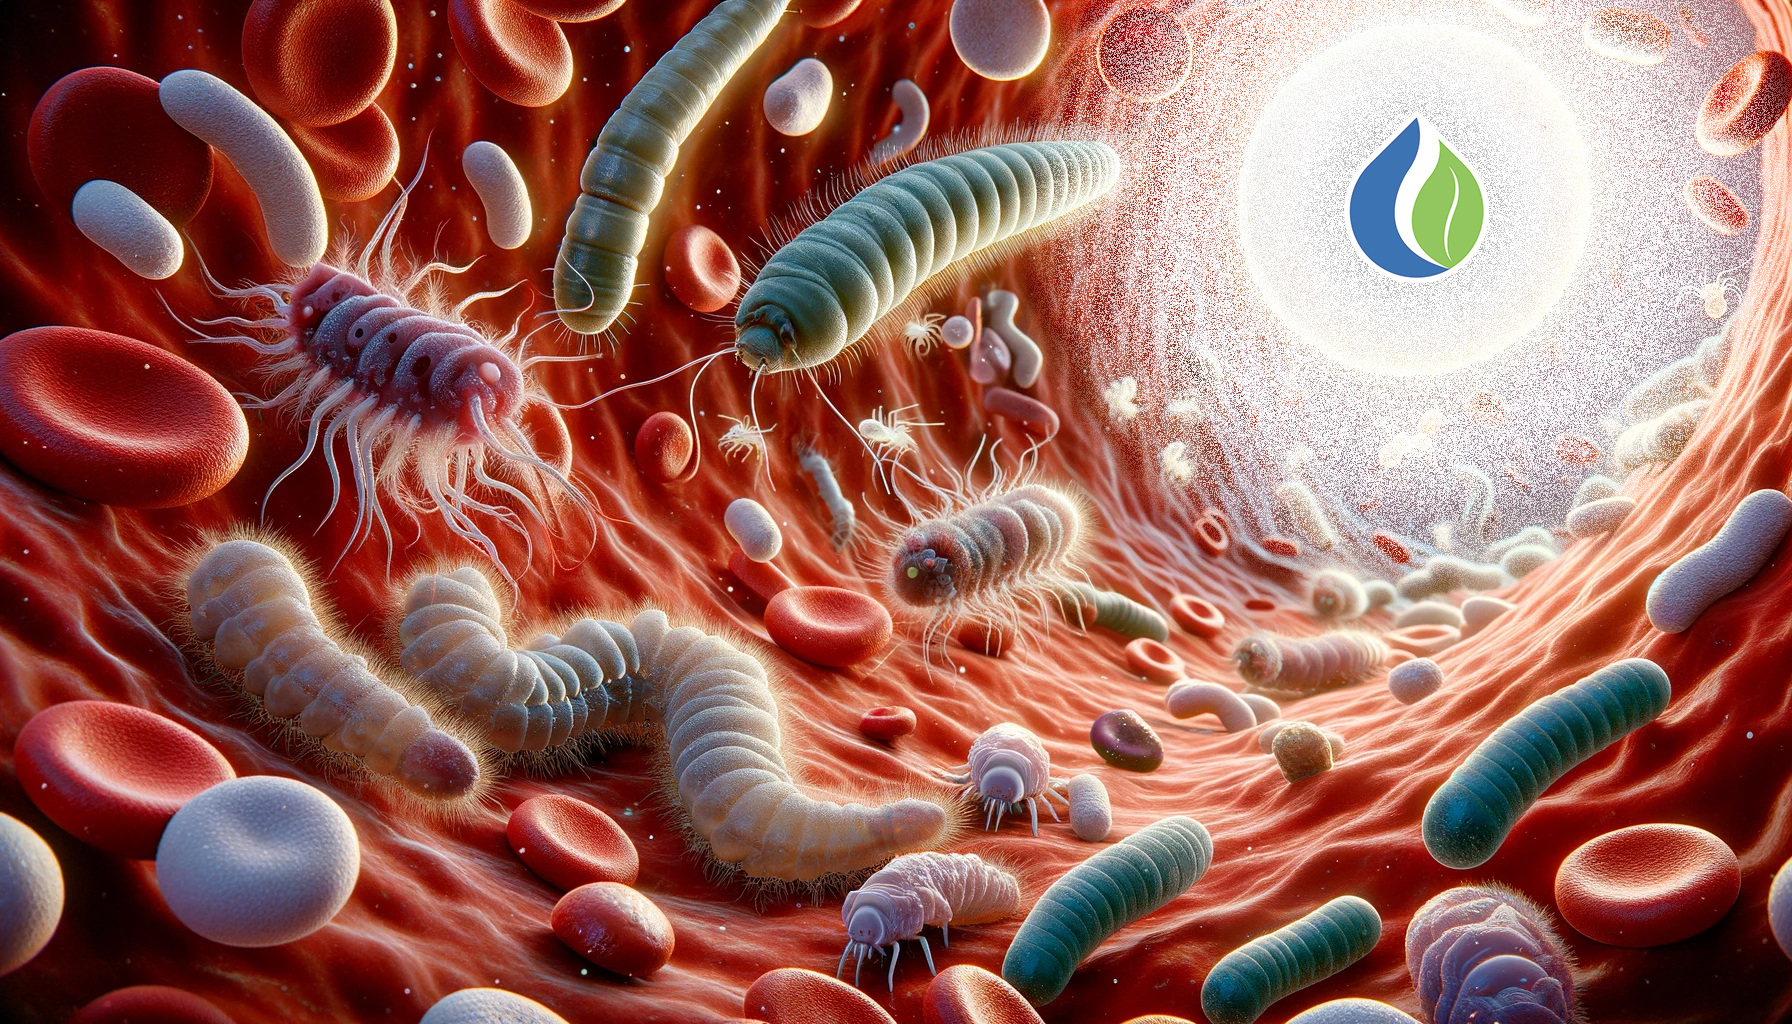 Everything you need to know about Parasites in our Body: Symptoms, Treatment and Prevention